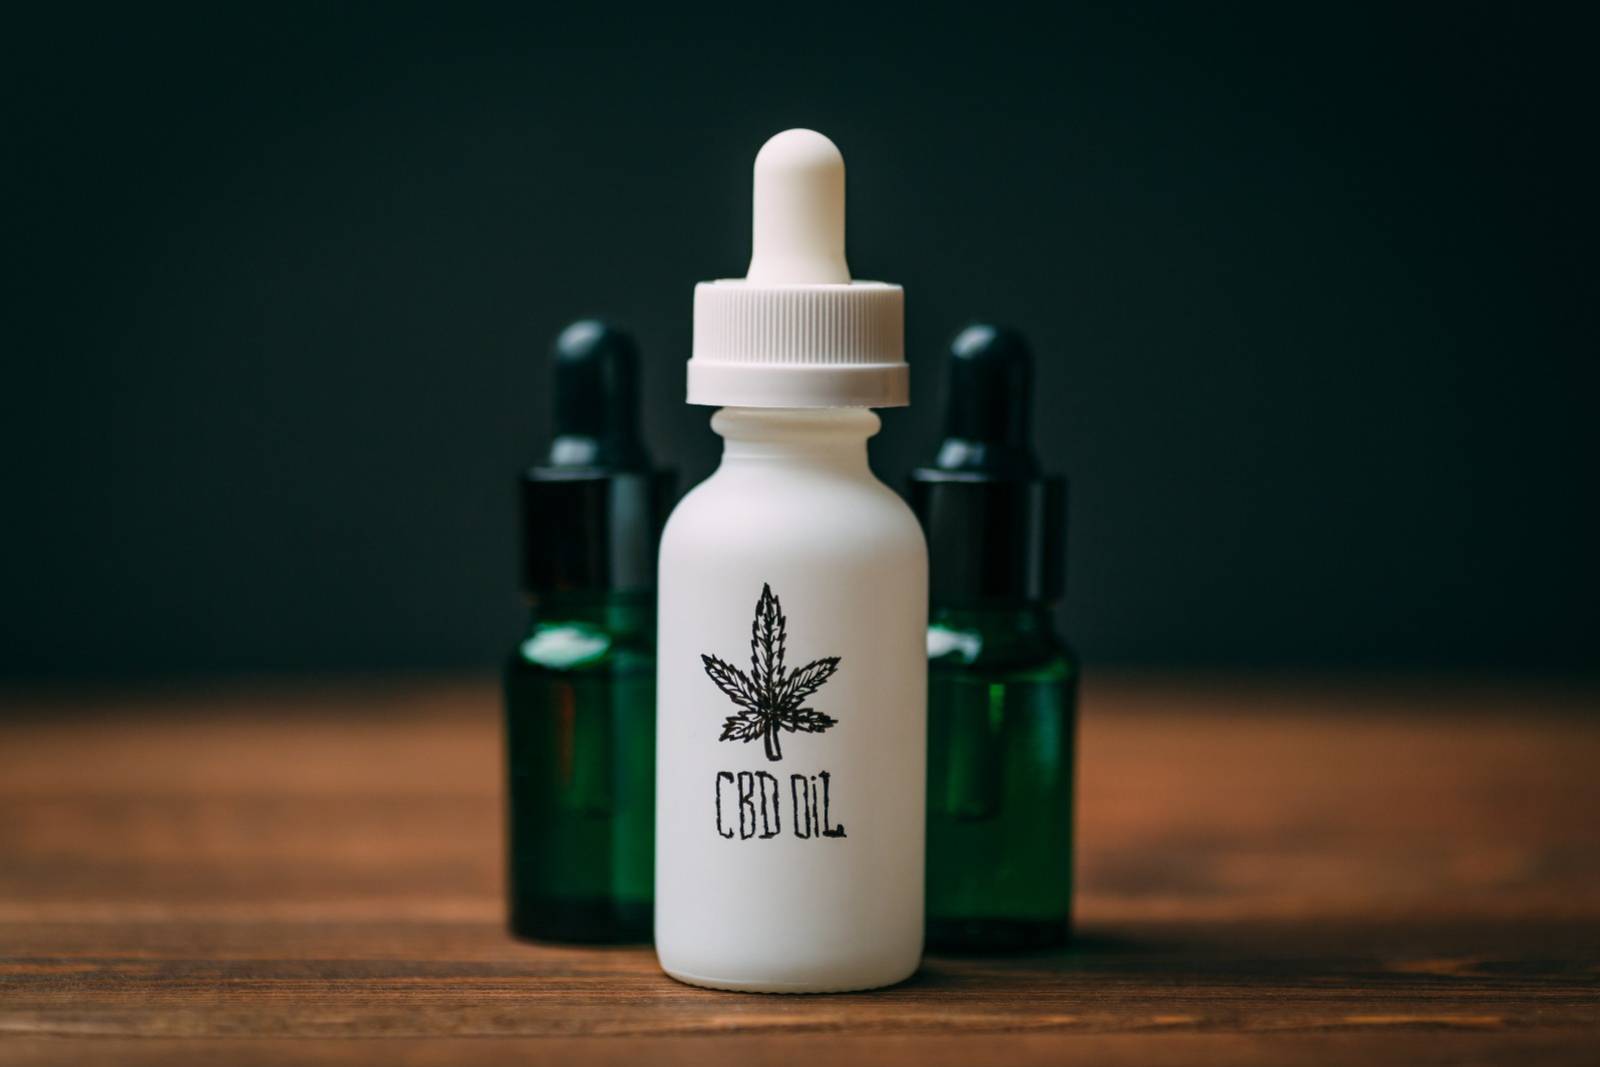 White glass bottle and two green bottles with text CBD Oil. Speed Greens